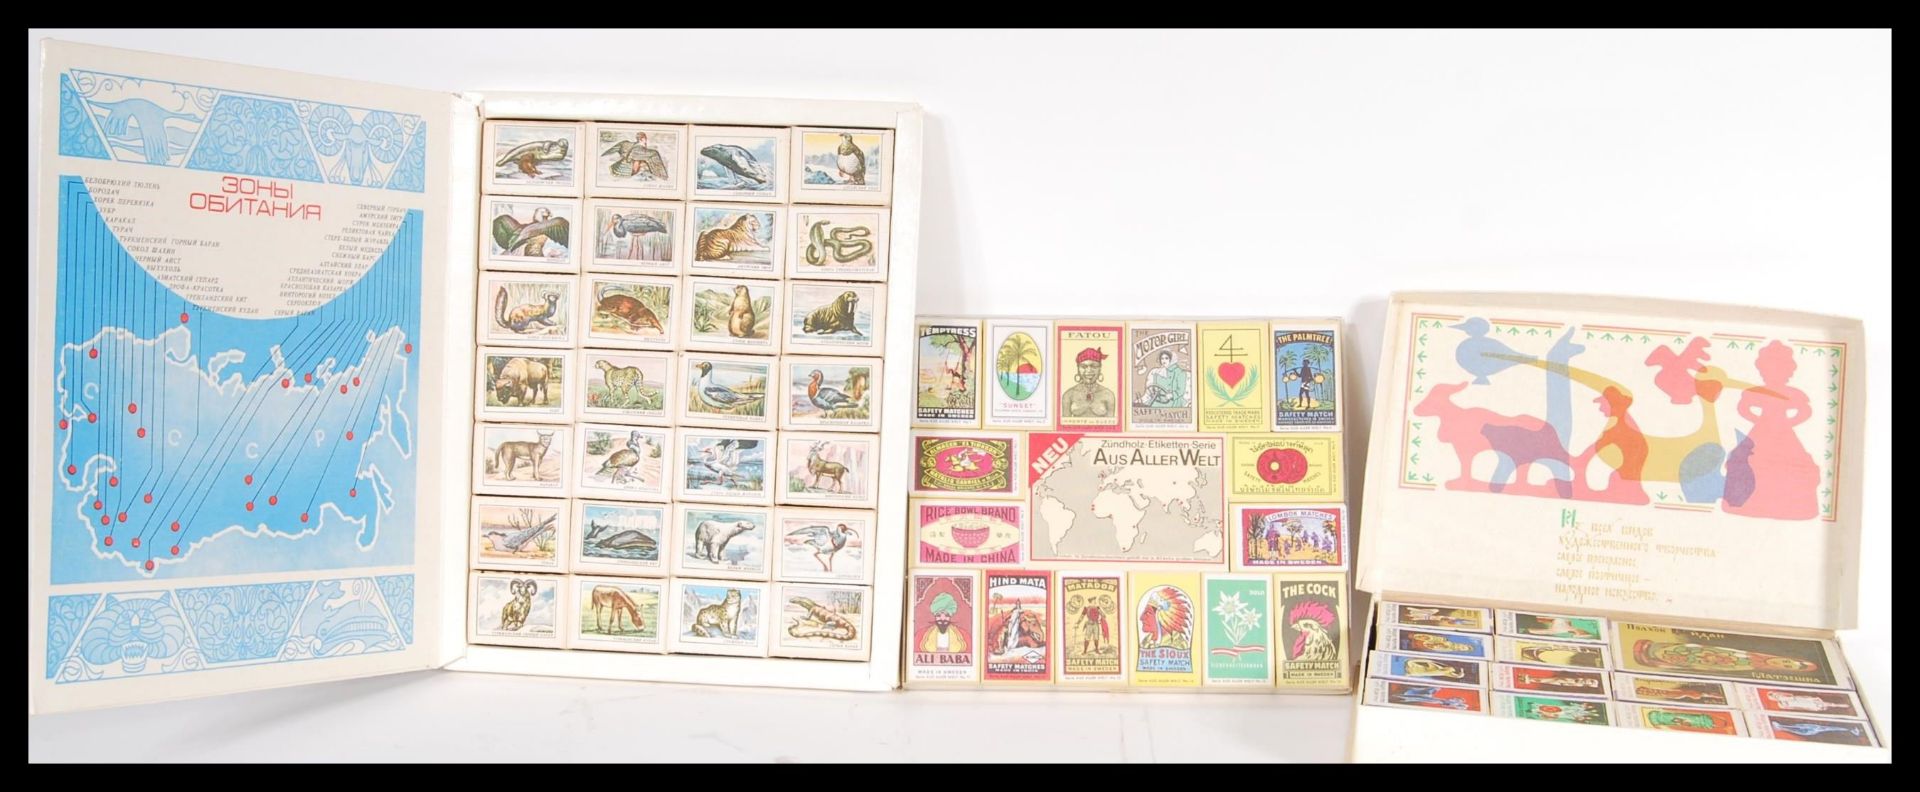 Three sets of Russian sets of matchboxes complete in boxes including CCCP set Aus Aller Welt set and